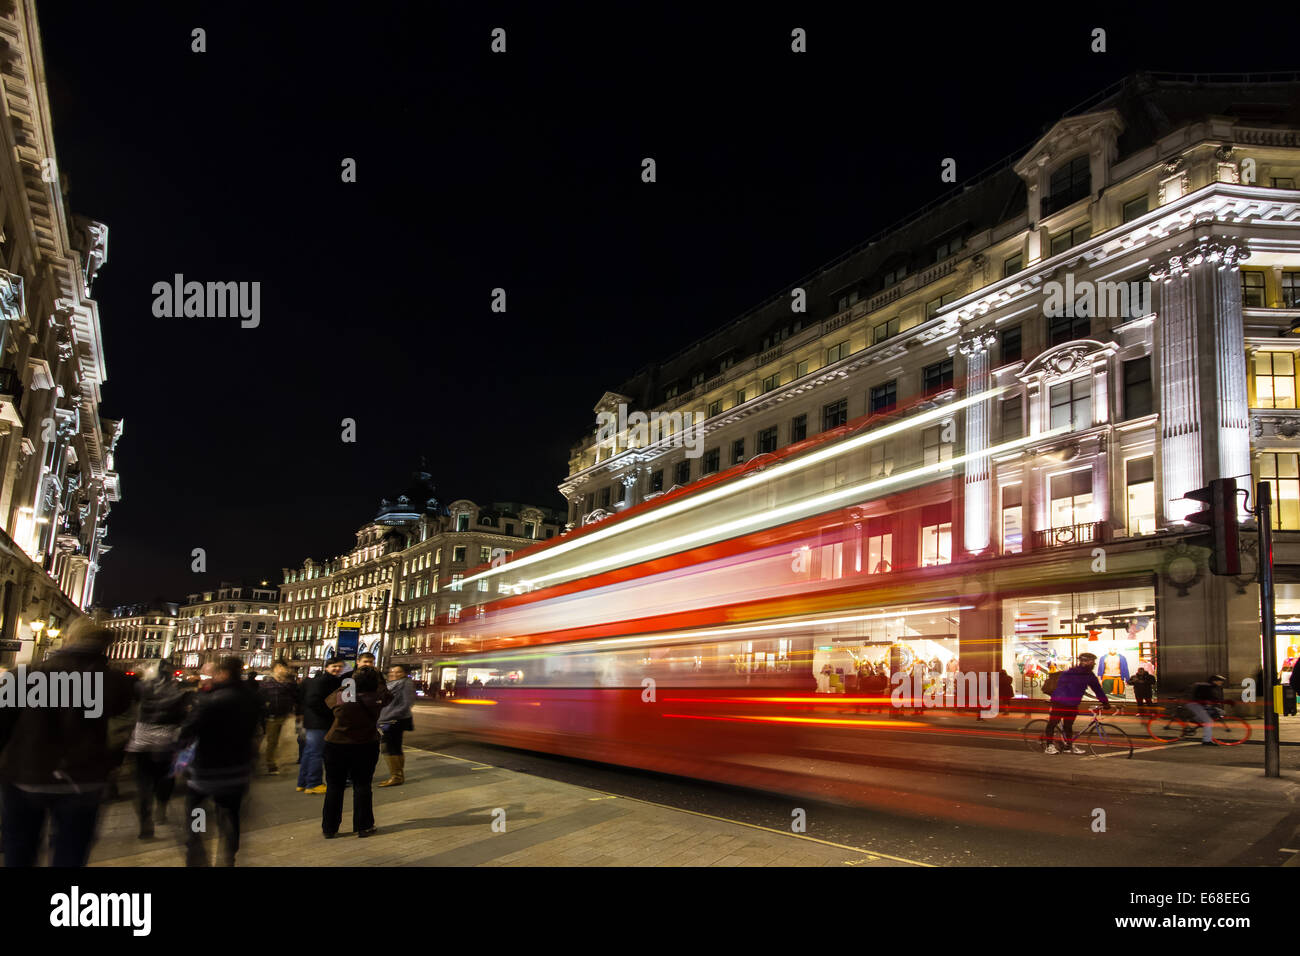 A London bus drives through the centre of London at night. A slow shutter speed blurs the bus as it moves by. London, UK. Ed Mar Stock Photo